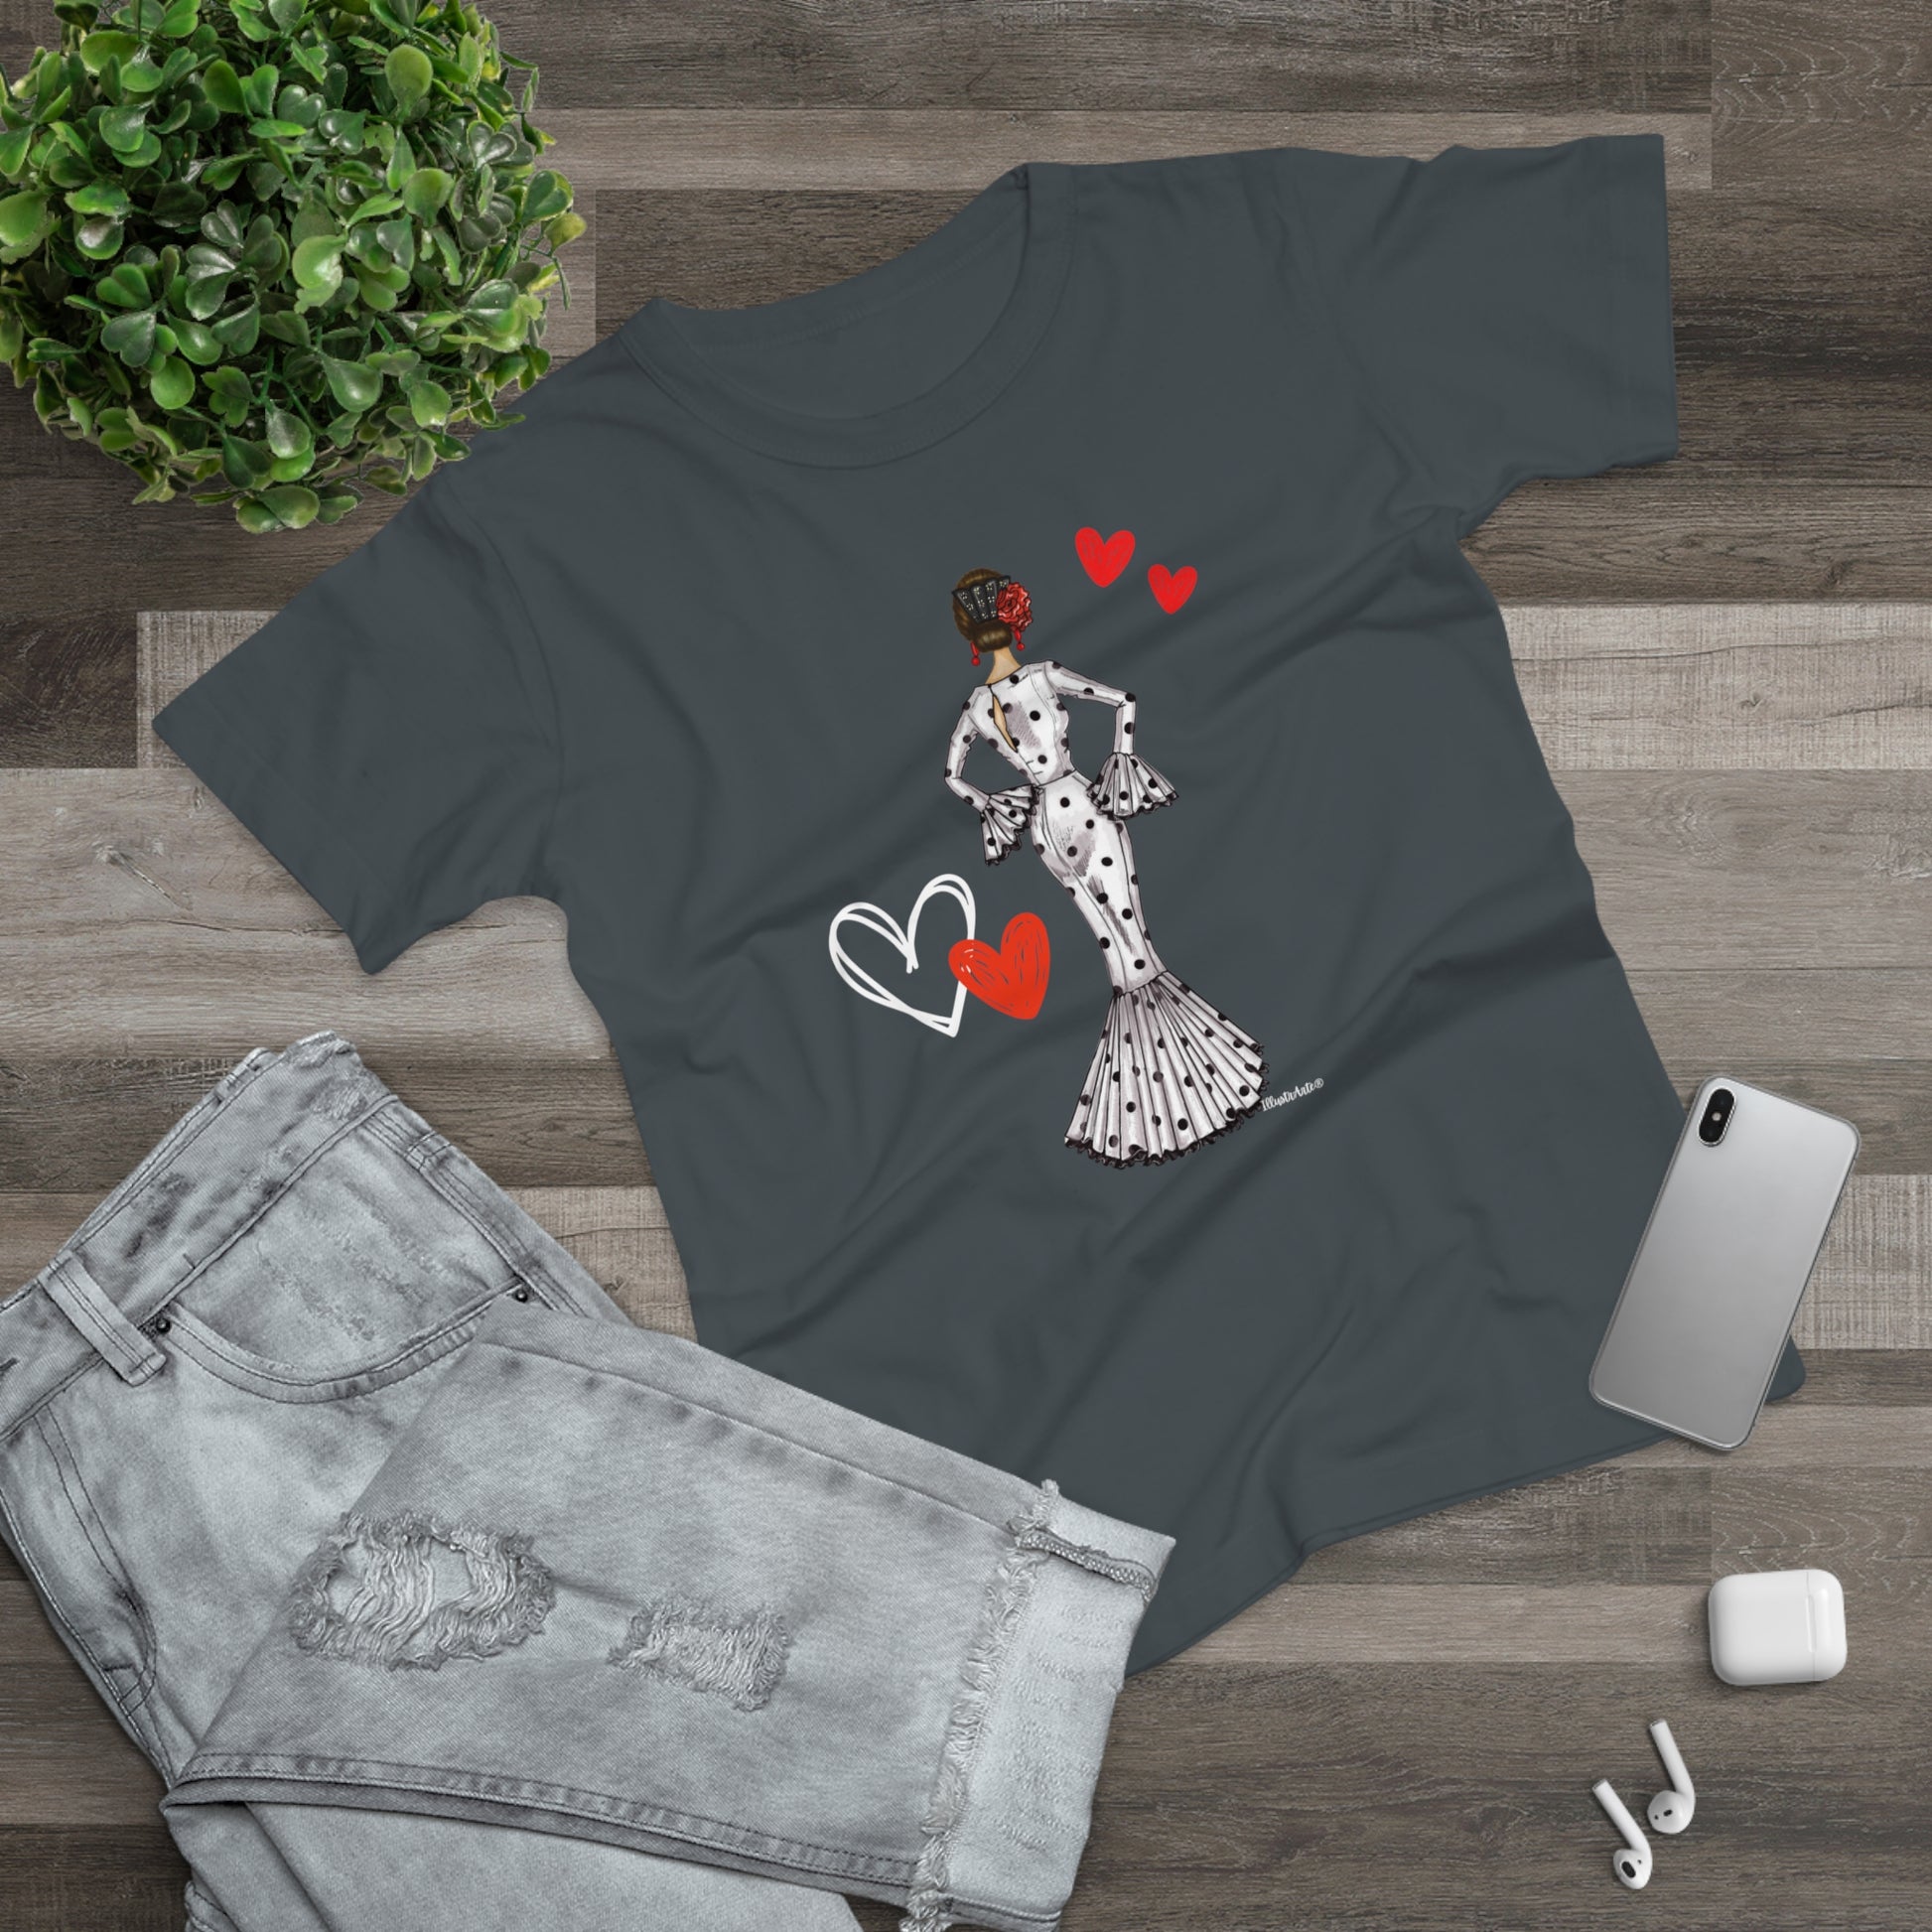 a t - shirt with a picture of a woman with hearts on it